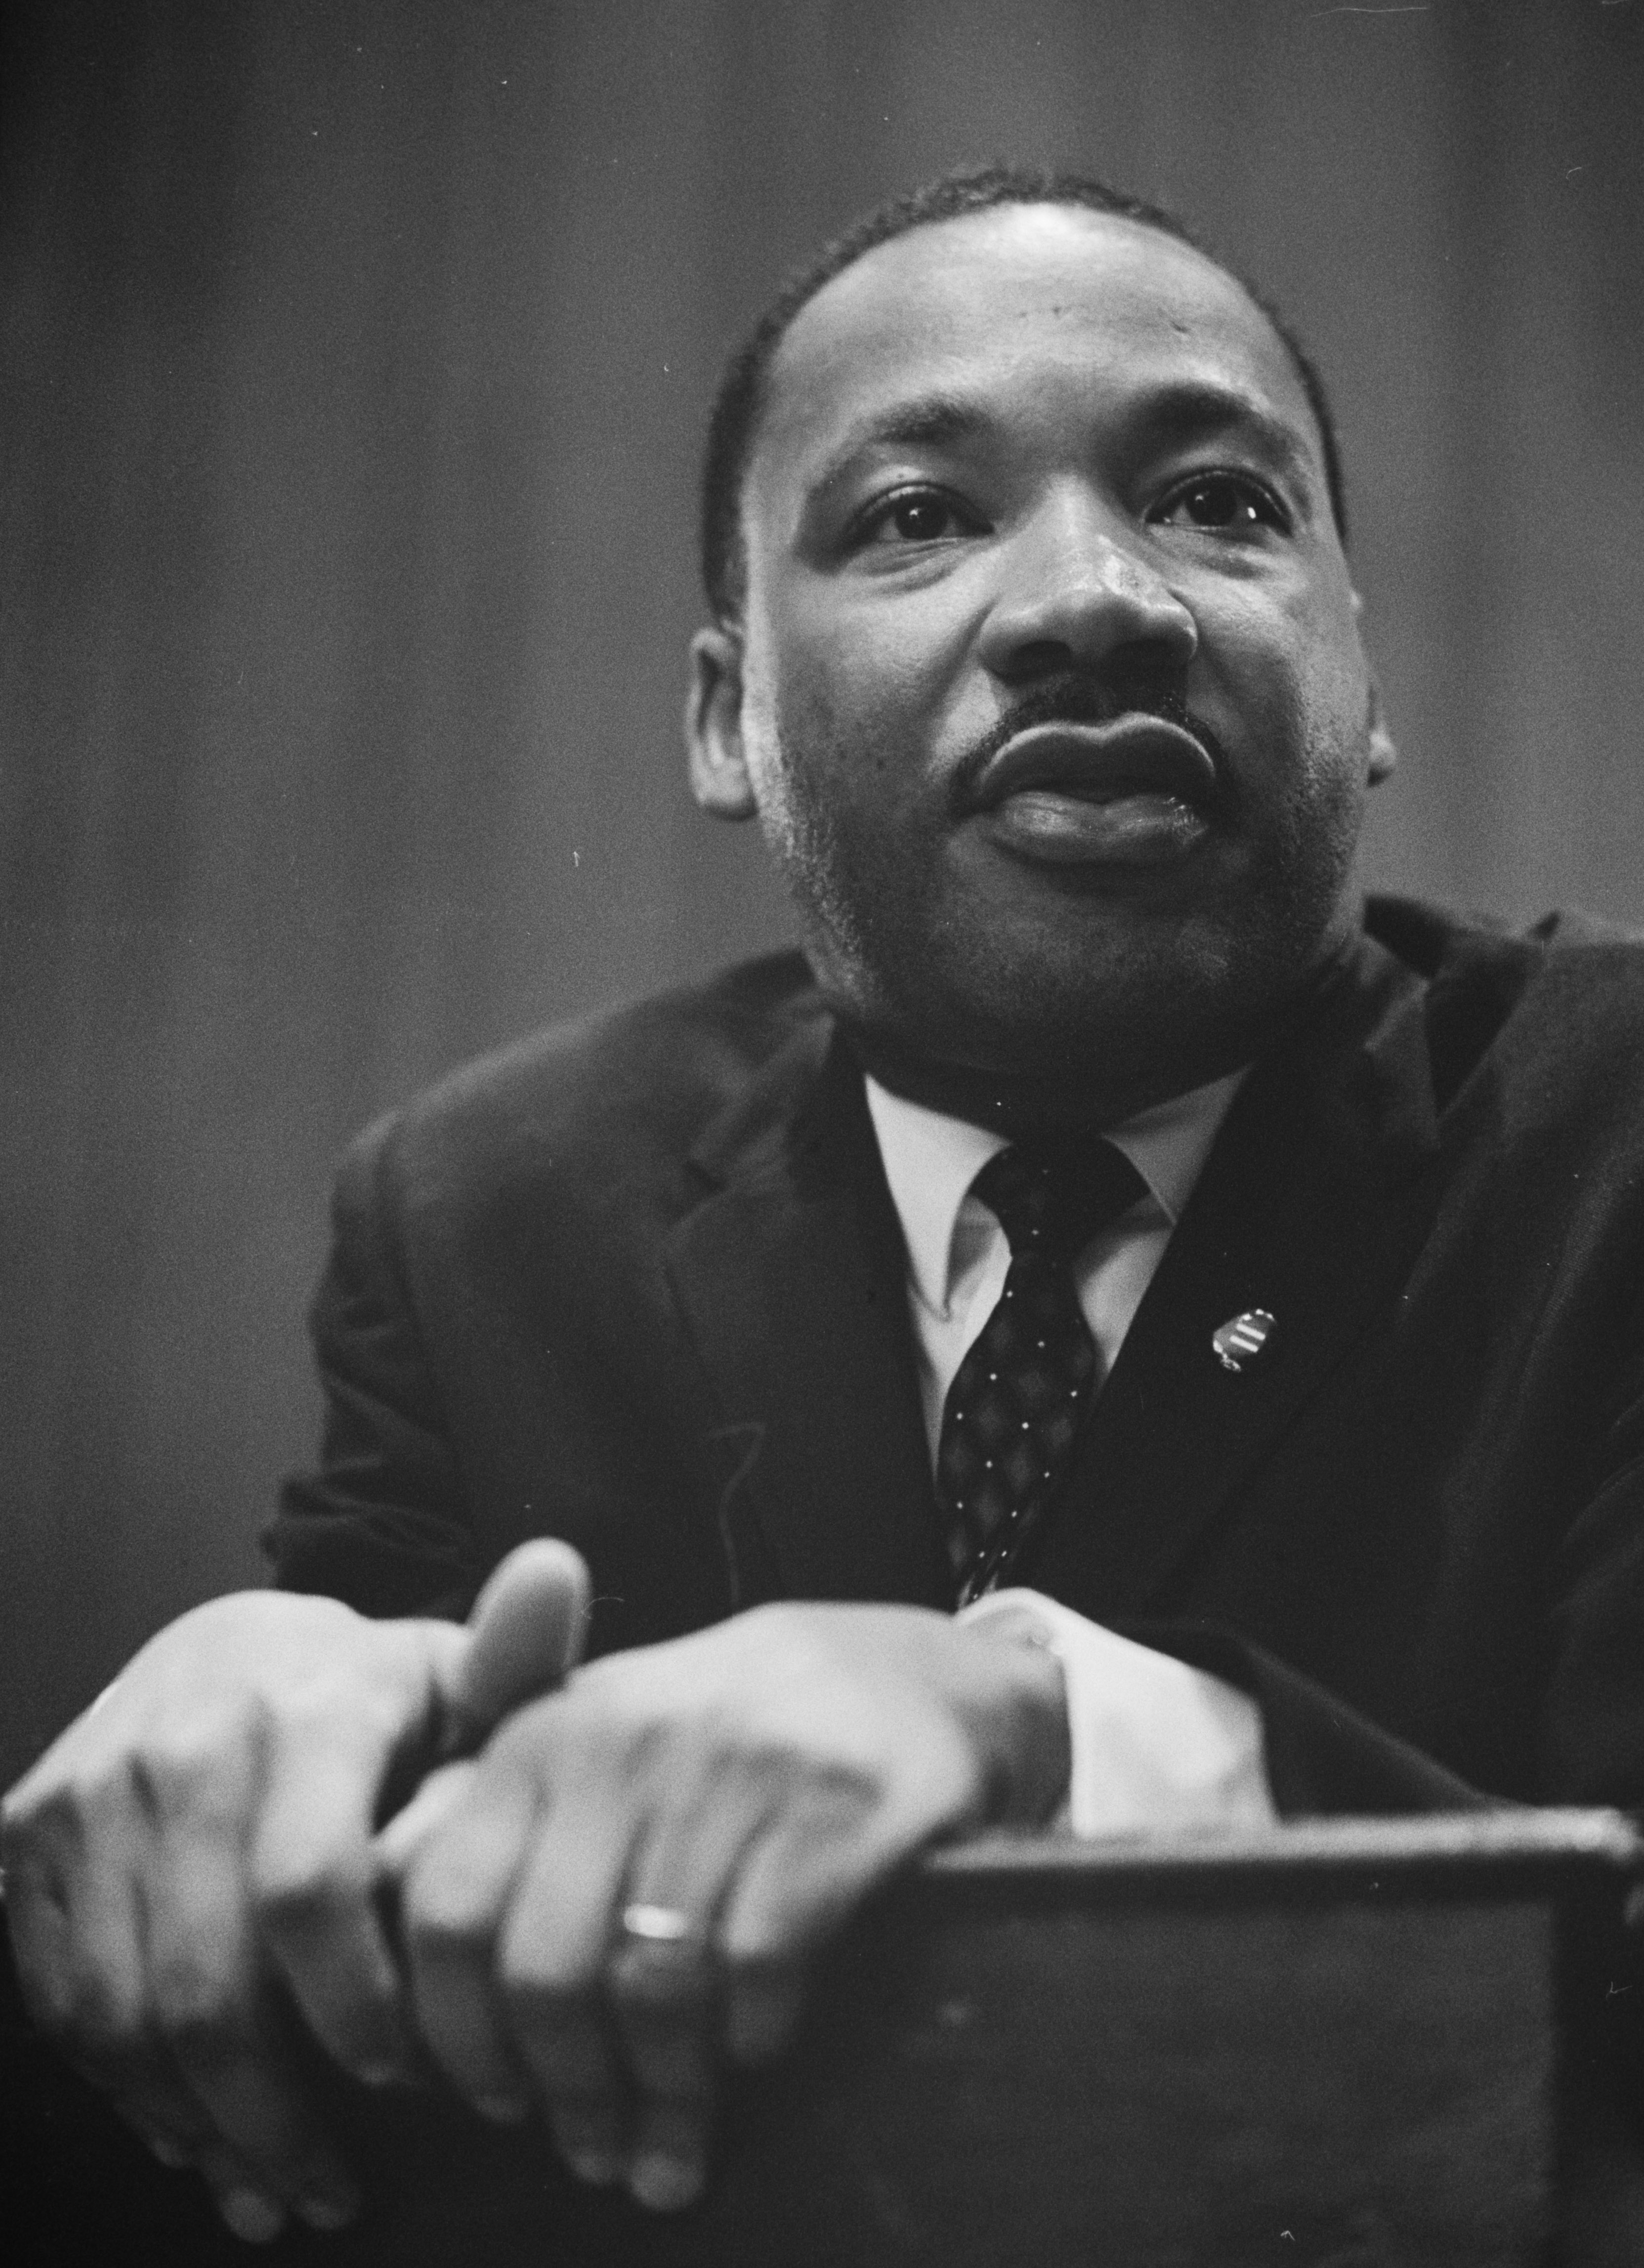 Martin Luther King leaning on a lectern